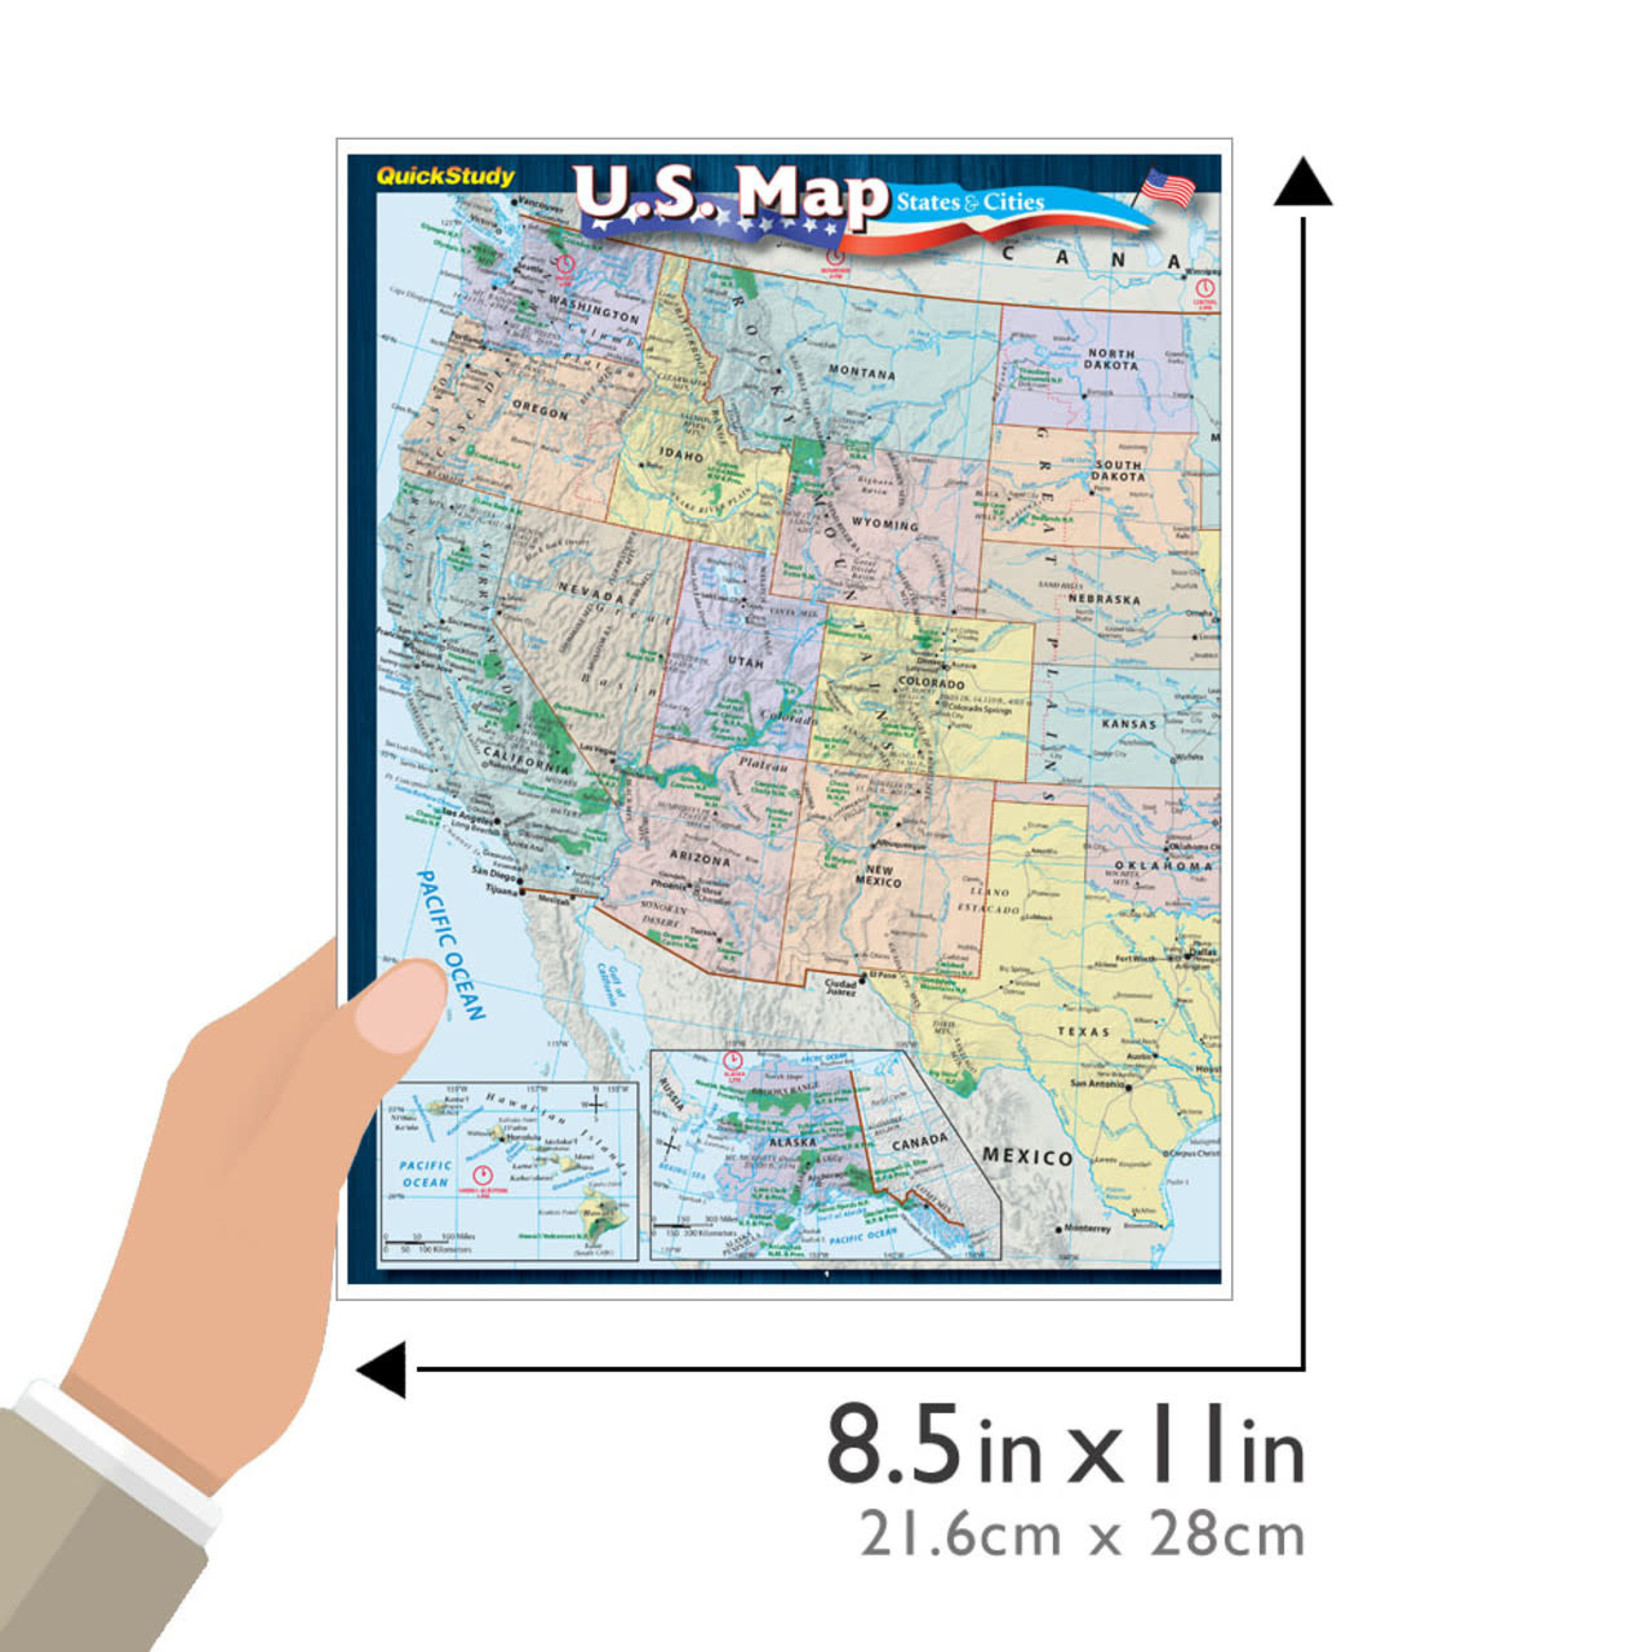 BAR CHARTS QuickStudy | U.S. Map: States & Cities Laminated Reference Guide